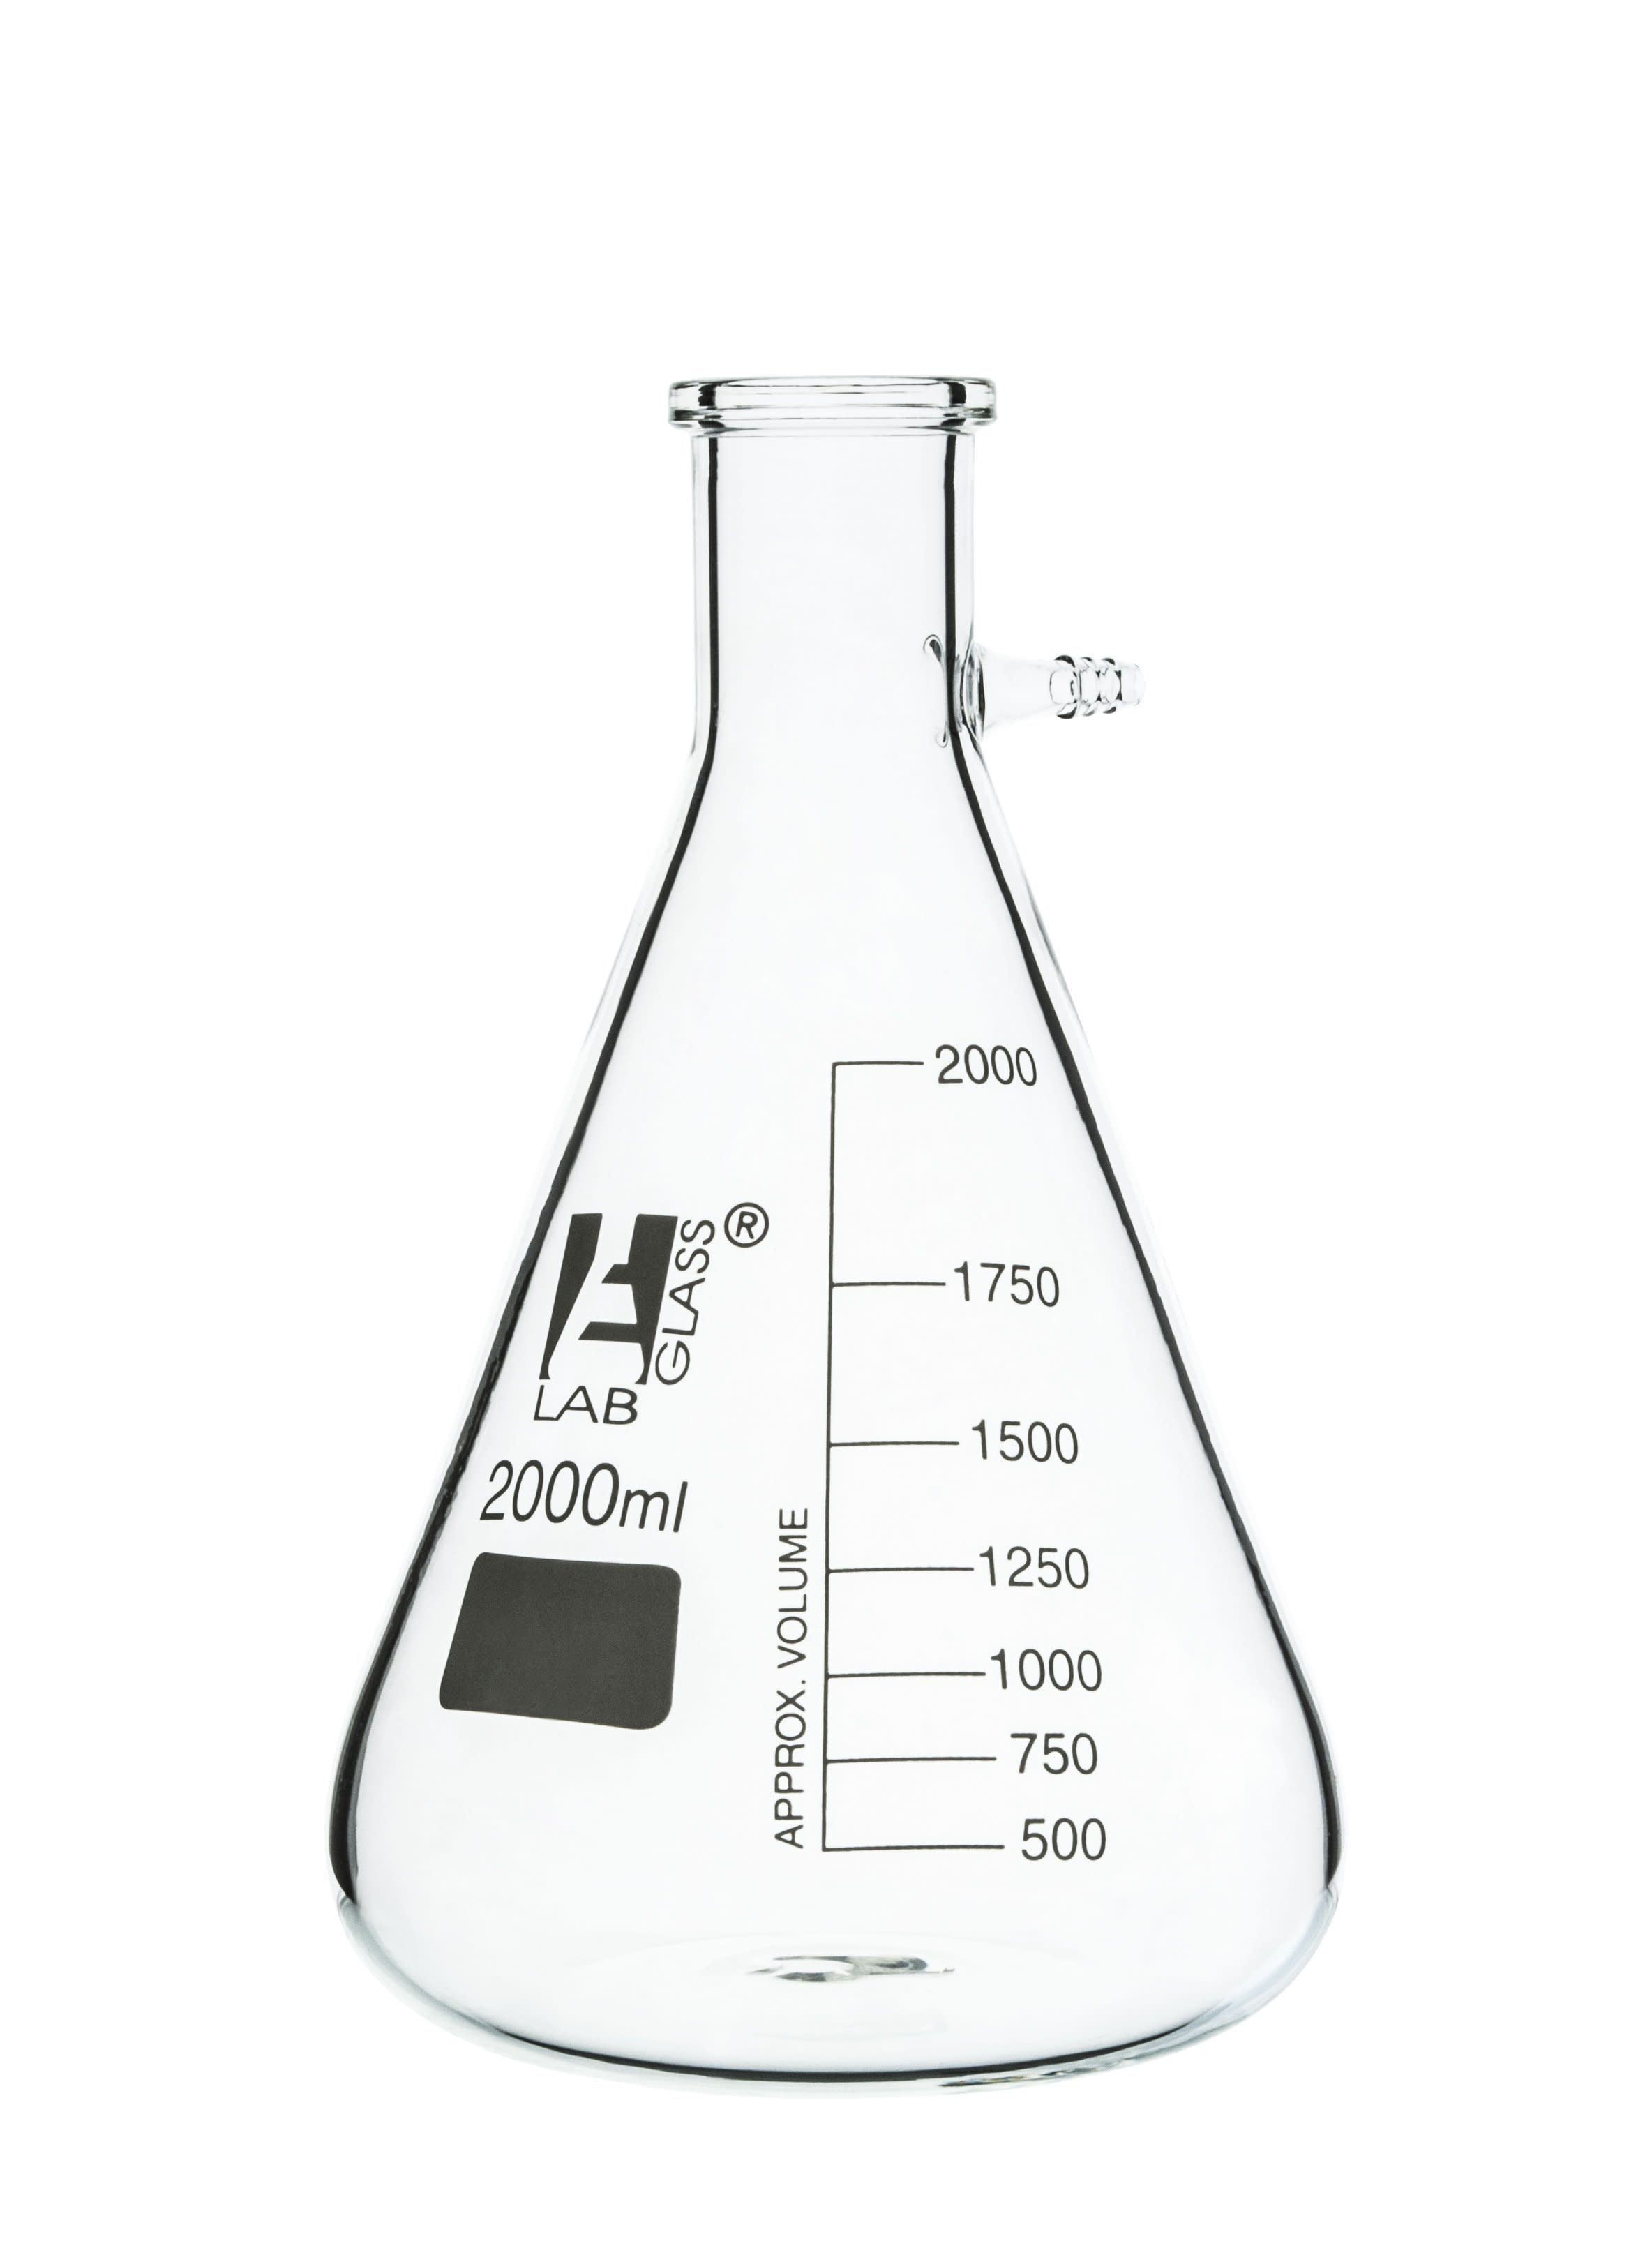 Borosilicate Glass Filtering Flask With Glass Connector, 2000ml, Graduated, Autoclavable